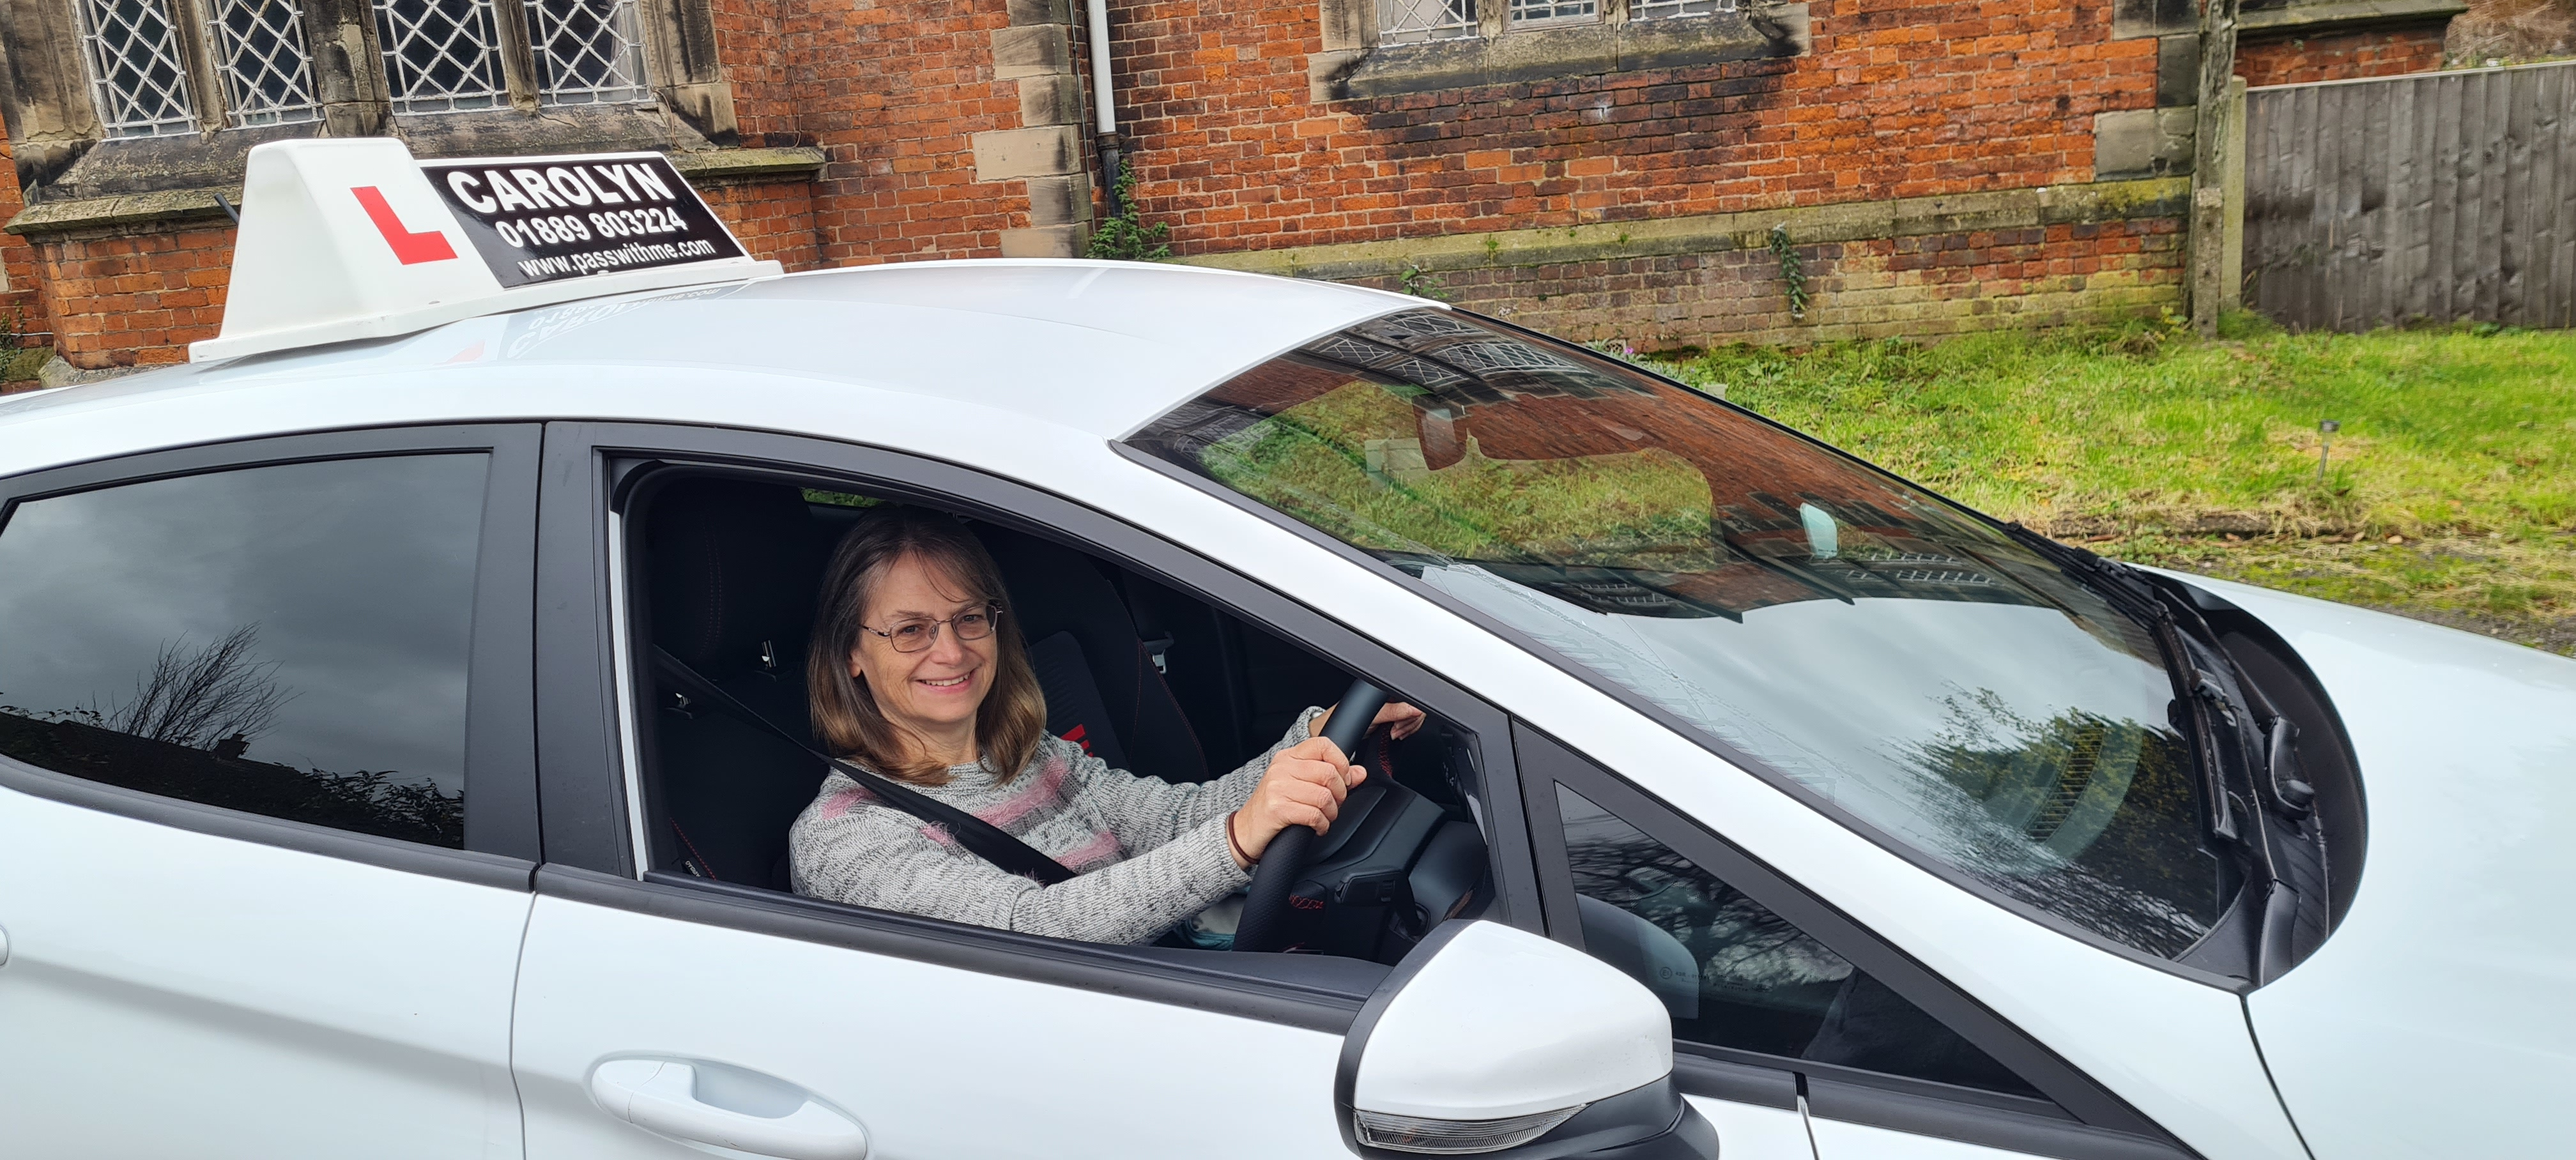 Carolyn Whitehouse, female driving instructor in Rugeley, Cannock and Lichfield areas. Please email carolyn.whitehouse@gmail.com or call 01889 803224 for details